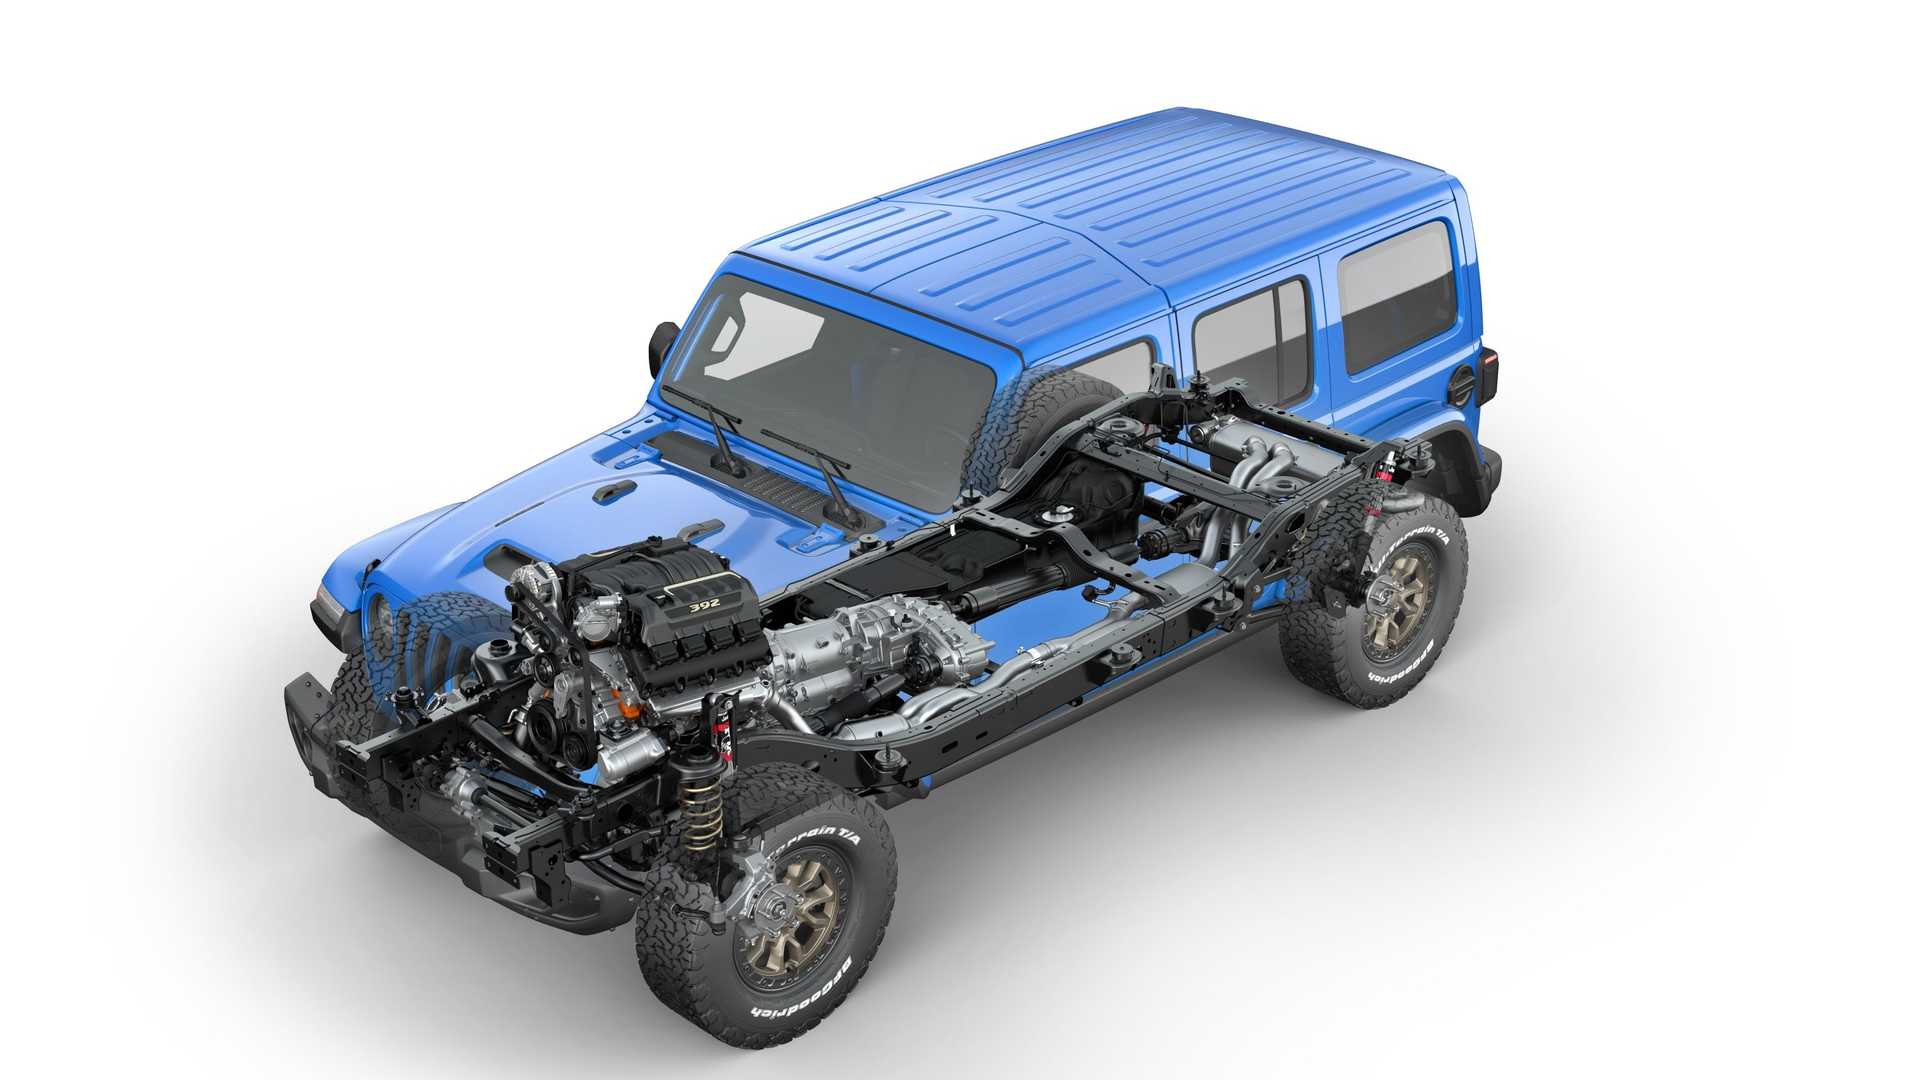 2021 Jeep Wrangler Rubicon 392 HEMI V8 Price Revealed, Costs More Than